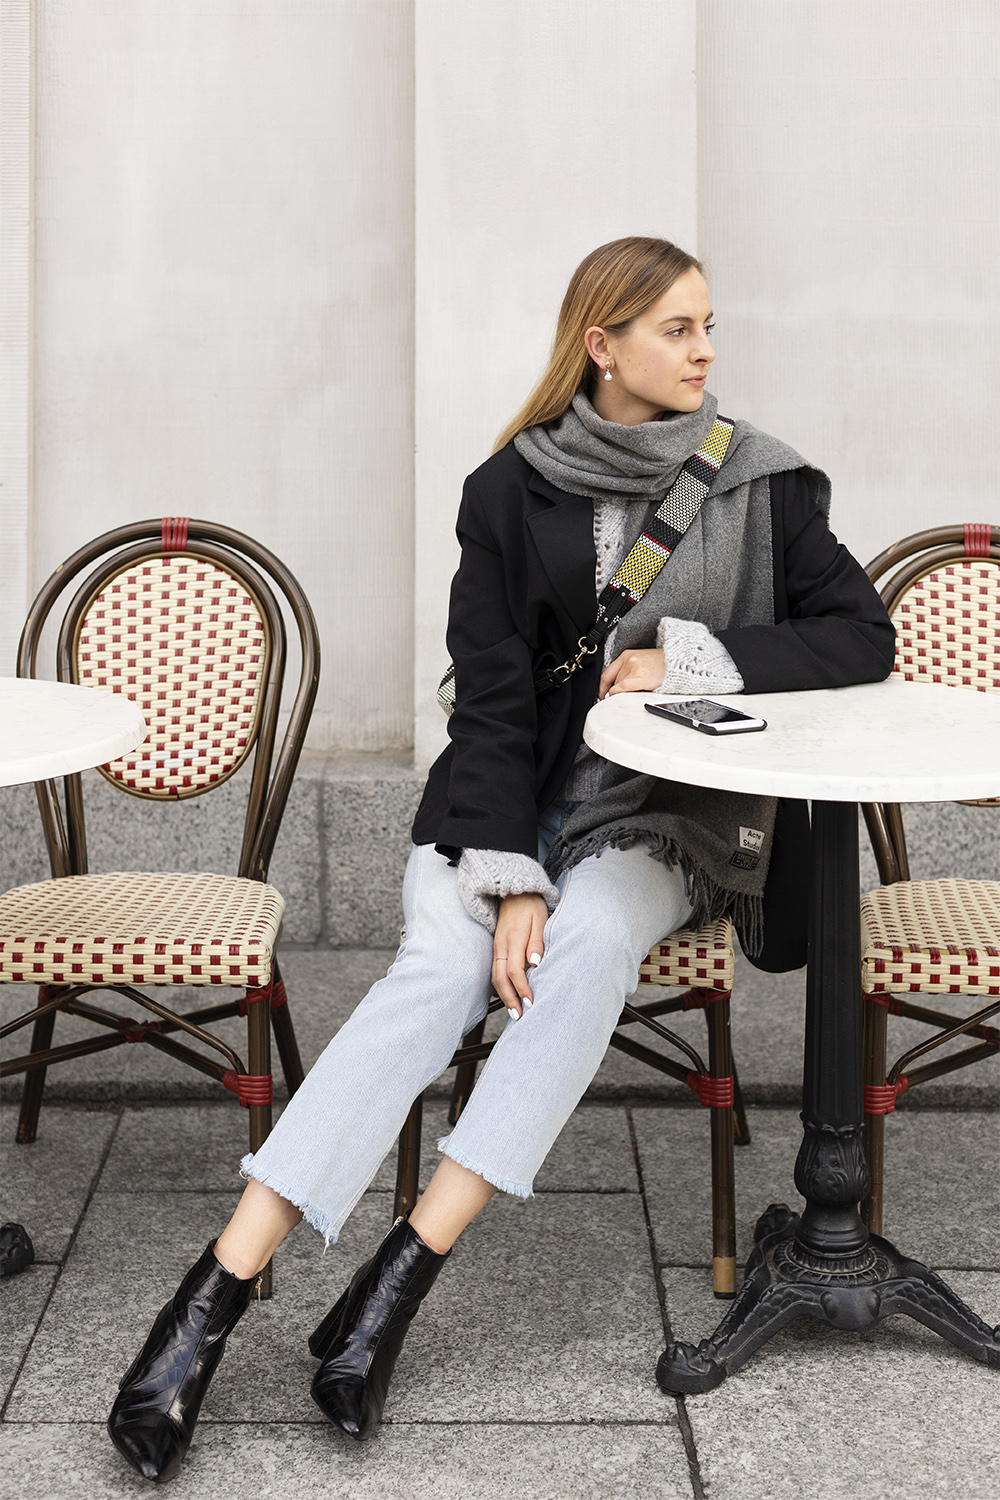 Parisian street style with Gino Rossi boots